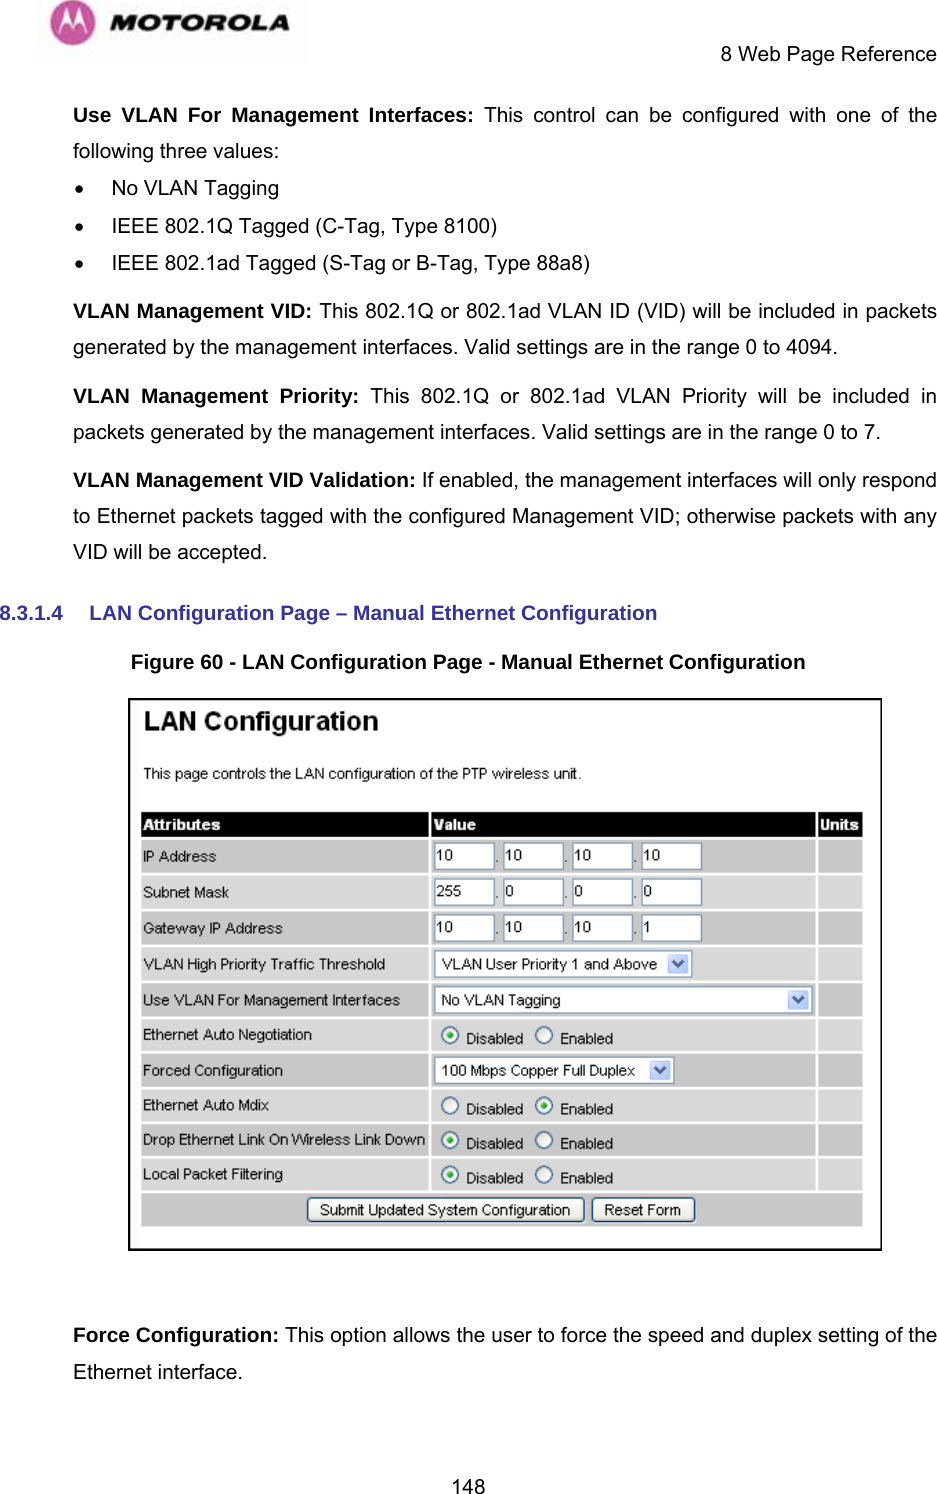     8 Web Page Reference  148Use VLAN For Management Interfaces: This control can be configured with one of the following three values: •  No VLAN Tagging •  IEEE 802.1Q Tagged (C-Tag, Type 8100) •  IEEE 802.1ad Tagged (S-Tag or B-Tag, Type 88a8) VLAN Management VID: This 802.1Q or 802.1ad VLAN ID (VID) will be included in packets generated by the management interfaces. Valid settings are in the range 0 to 4094. VLAN Management Priority: This 802.1Q or 802.1ad VLAN Priority will be included in packets generated by the management interfaces. Valid settings are in the range 0 to 7. VLAN Management VID Validation: If enabled, the management interfaces will only respond to Ethernet packets tagged with the configured Management VID; otherwise packets with any VID will be accepted. 8.3.1.4  LAN Configuration Page – Manual Ethernet Configuration Figure 60 - LAN Configuration Page - Manual Ethernet Configuration   Force Configuration: This option allows the user to force the speed and duplex setting of the Ethernet interface. 